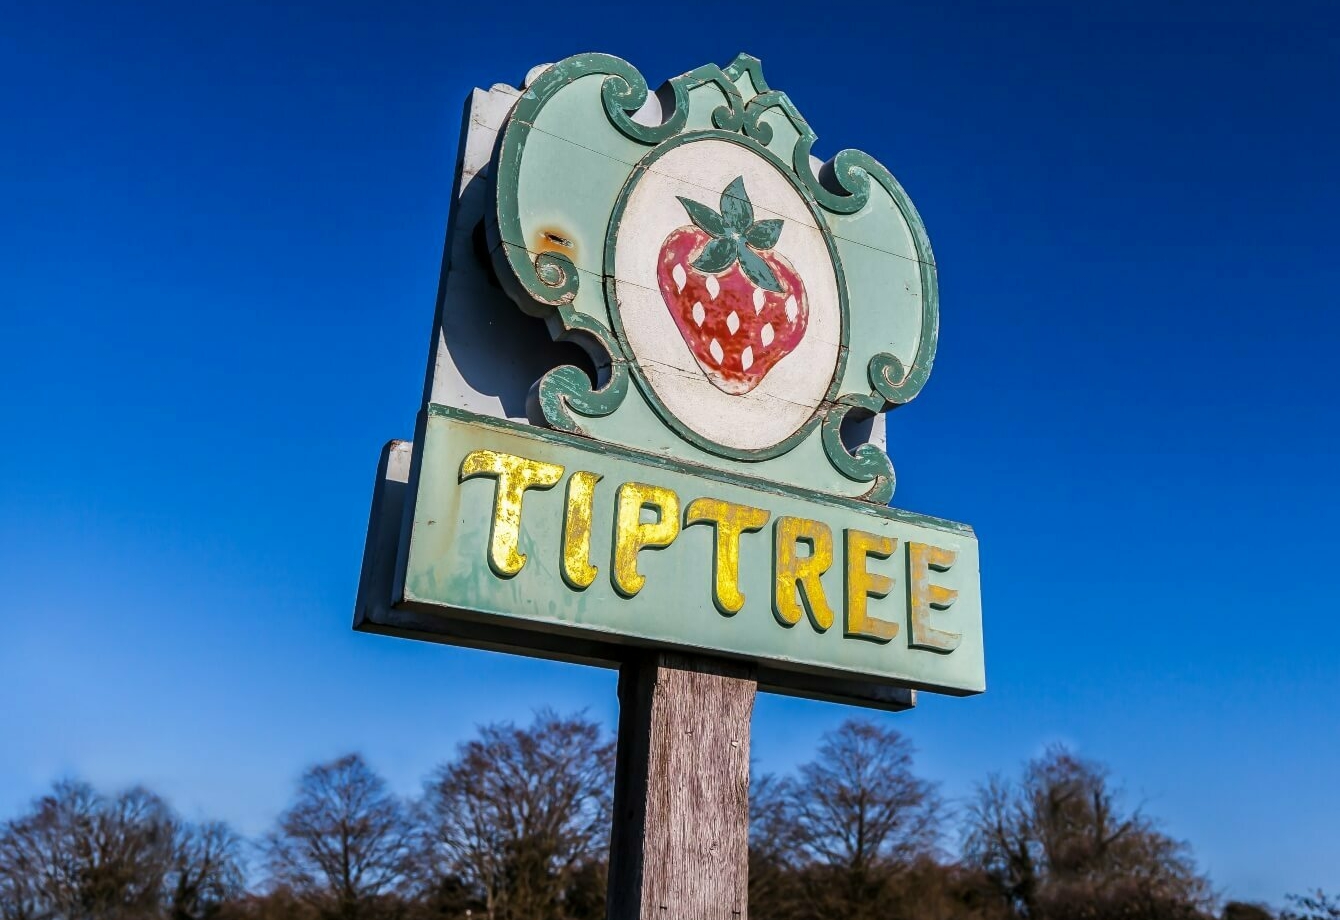 Tiptree village sign - Find your new build house in Essex